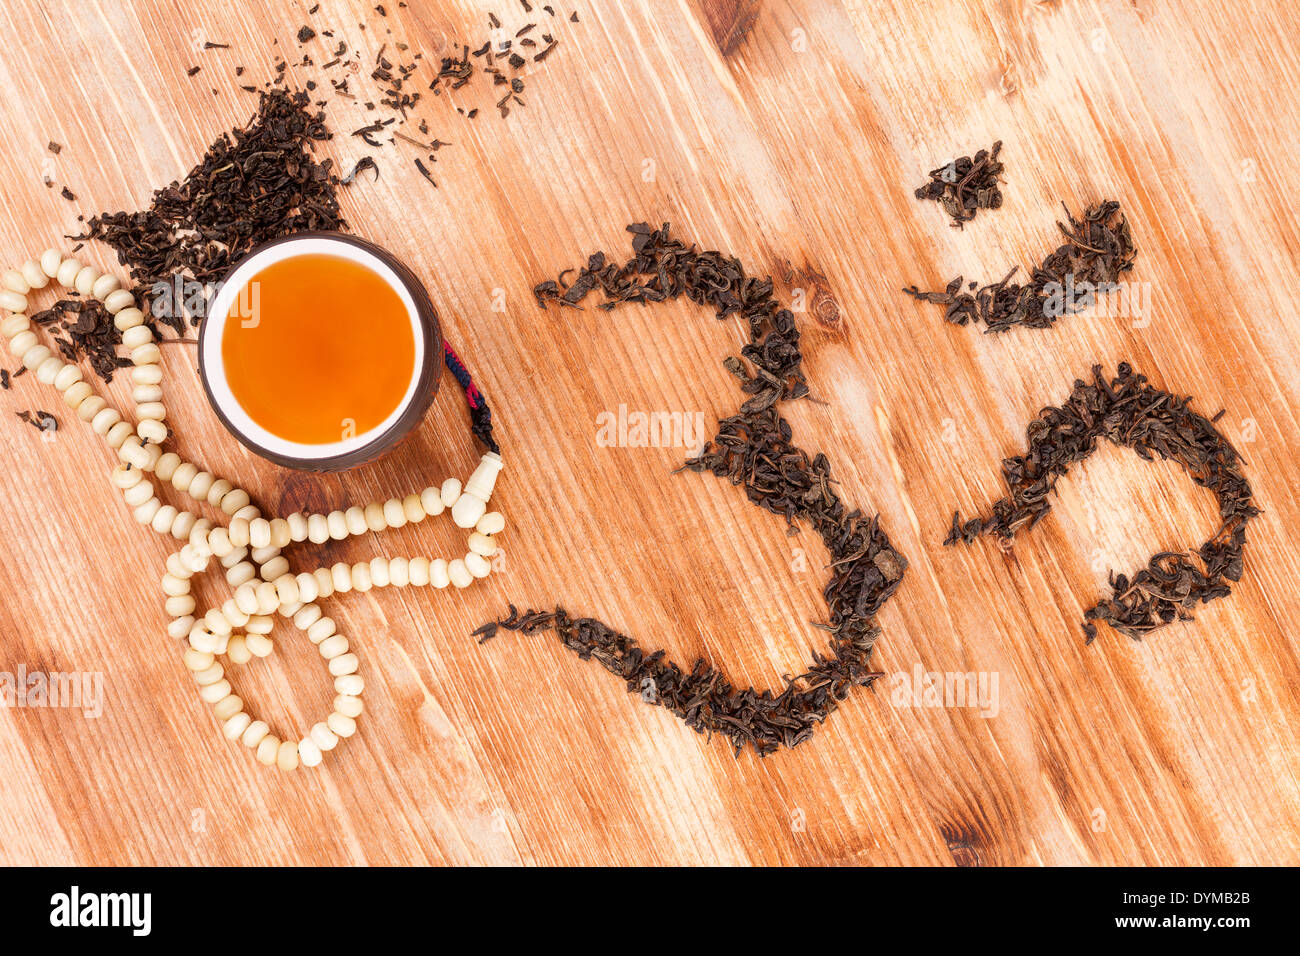 Traditional tea ceremony. Green tea and tea leaves on brown wooden background. Asian tea drinking. Stock Photo